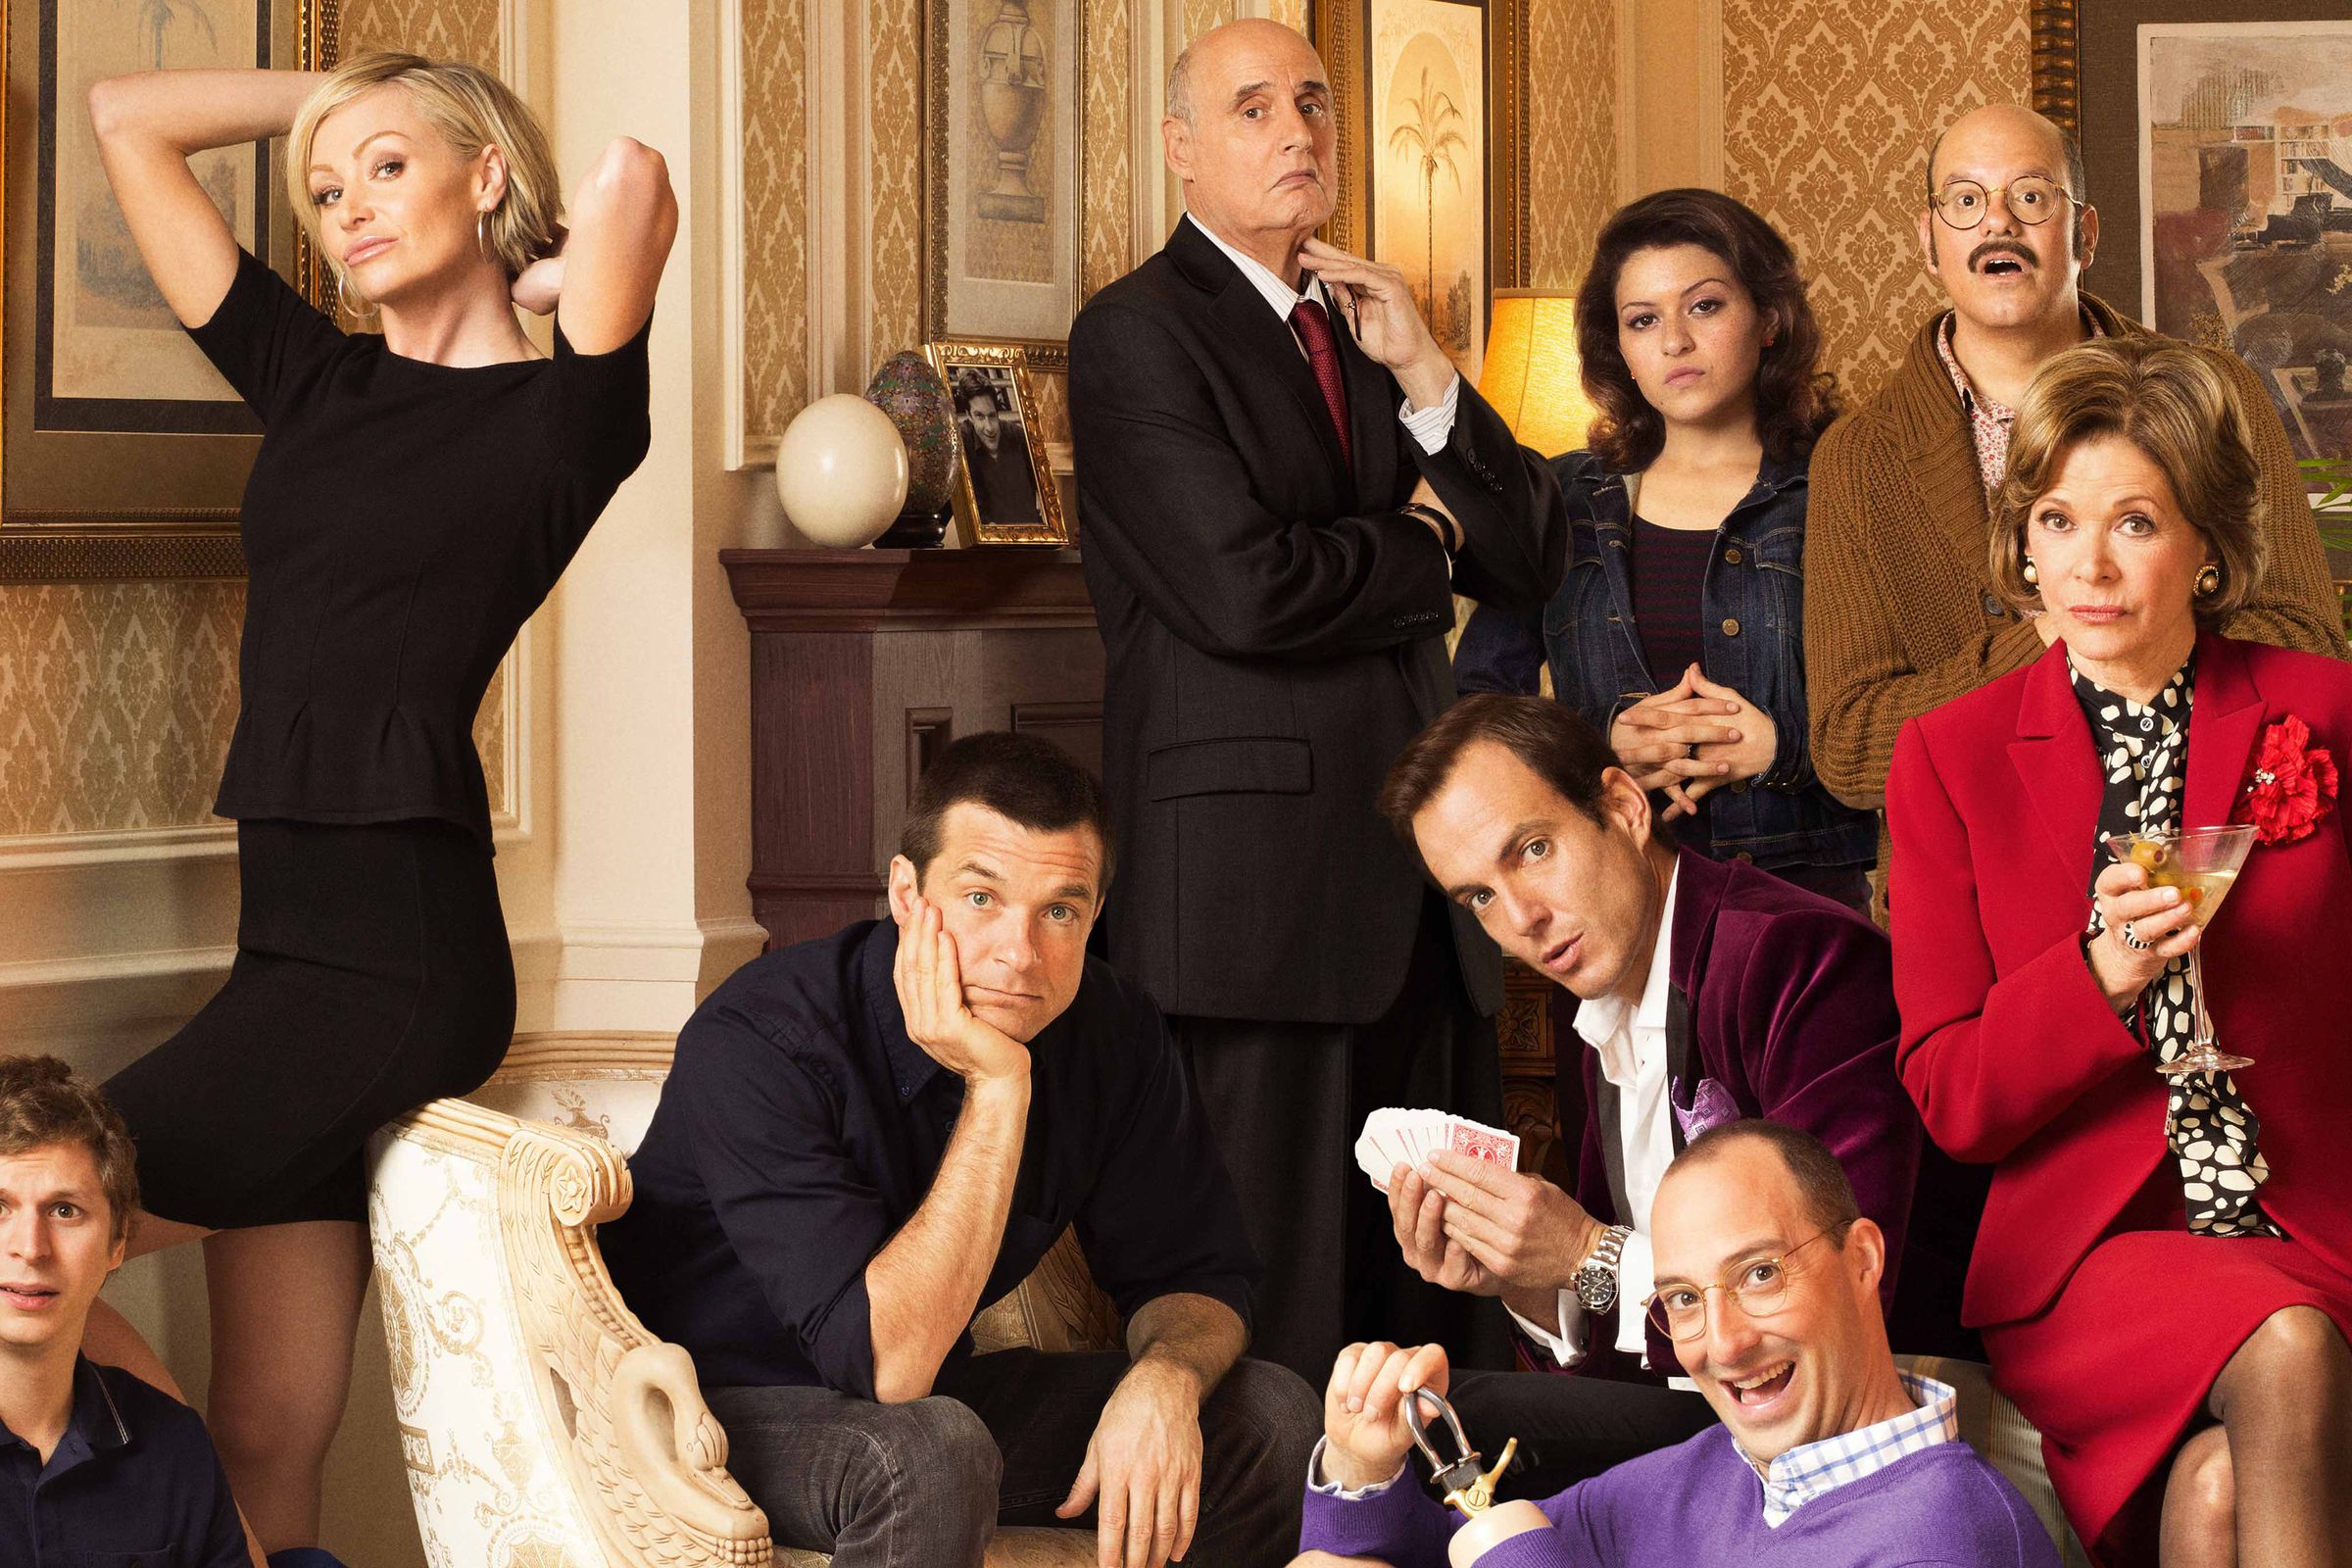 An image showing the cast of Arrested Development